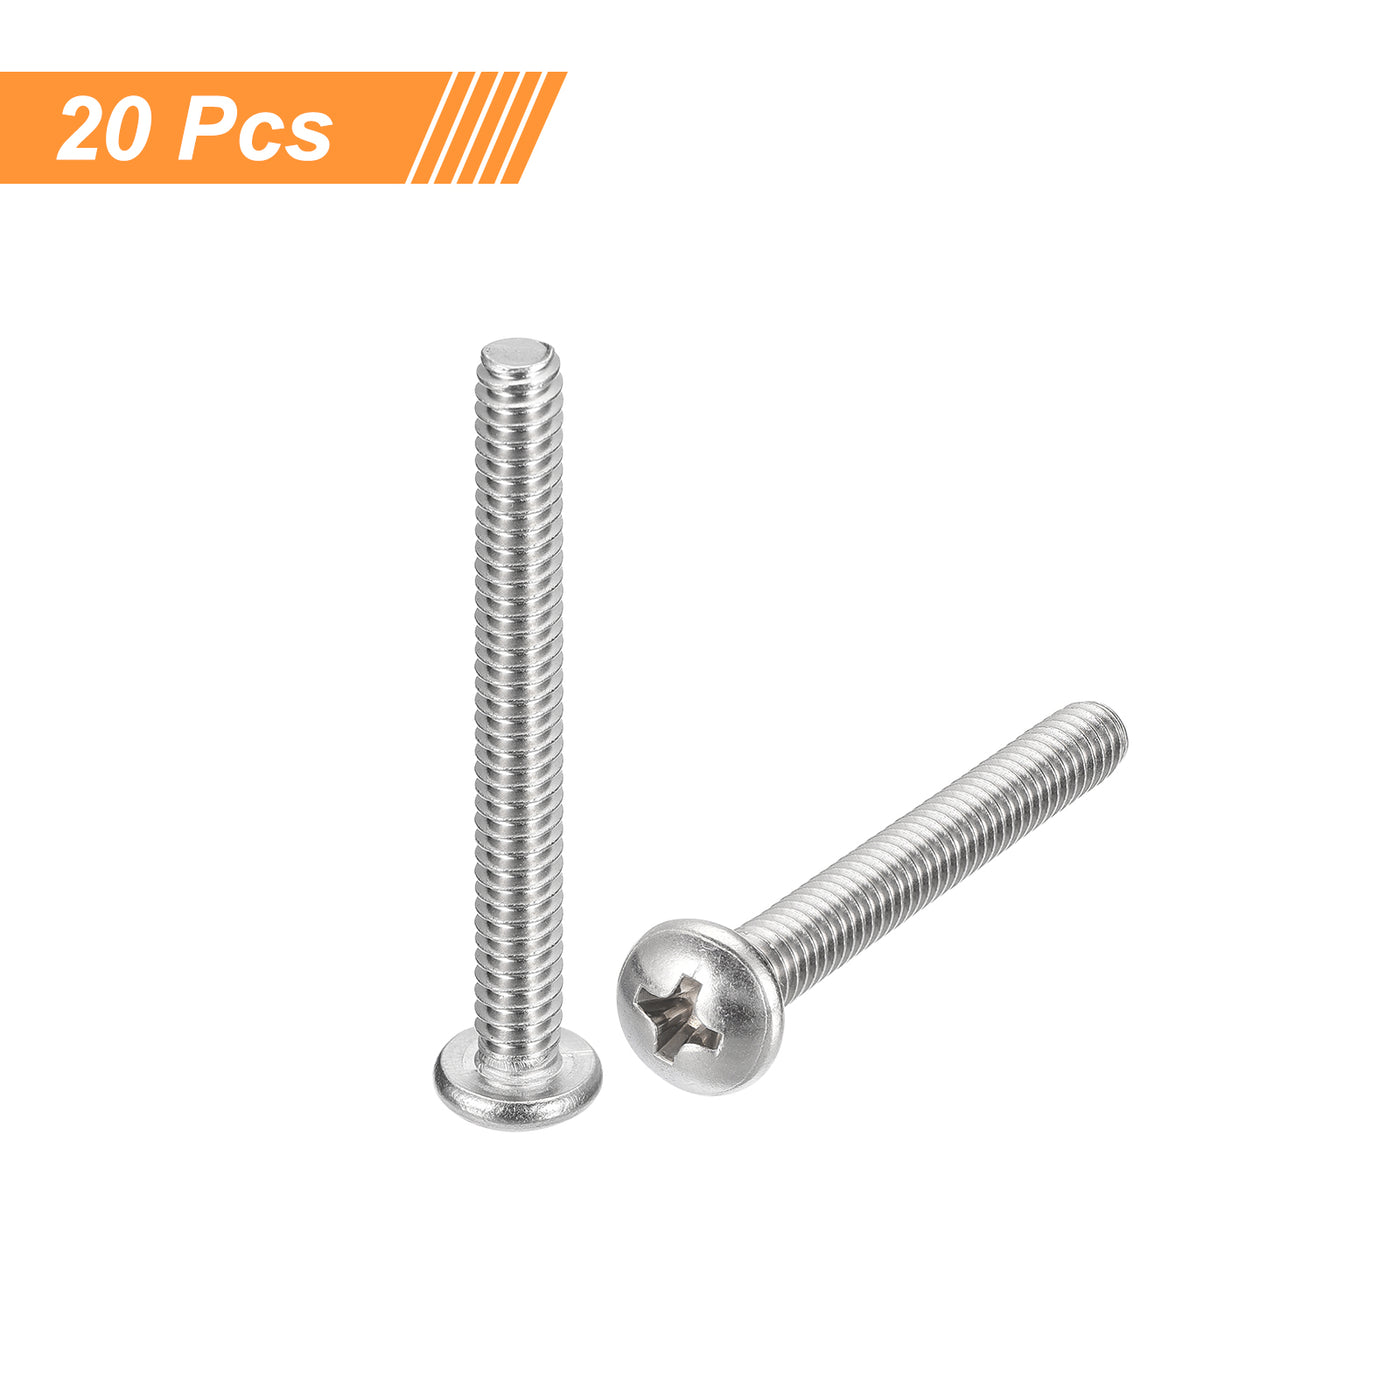 uxcell Uxcell #10-24x1-3/4" Pan Head Machine Screws, Stainless Steel 18-8 Screw, Pack of 20